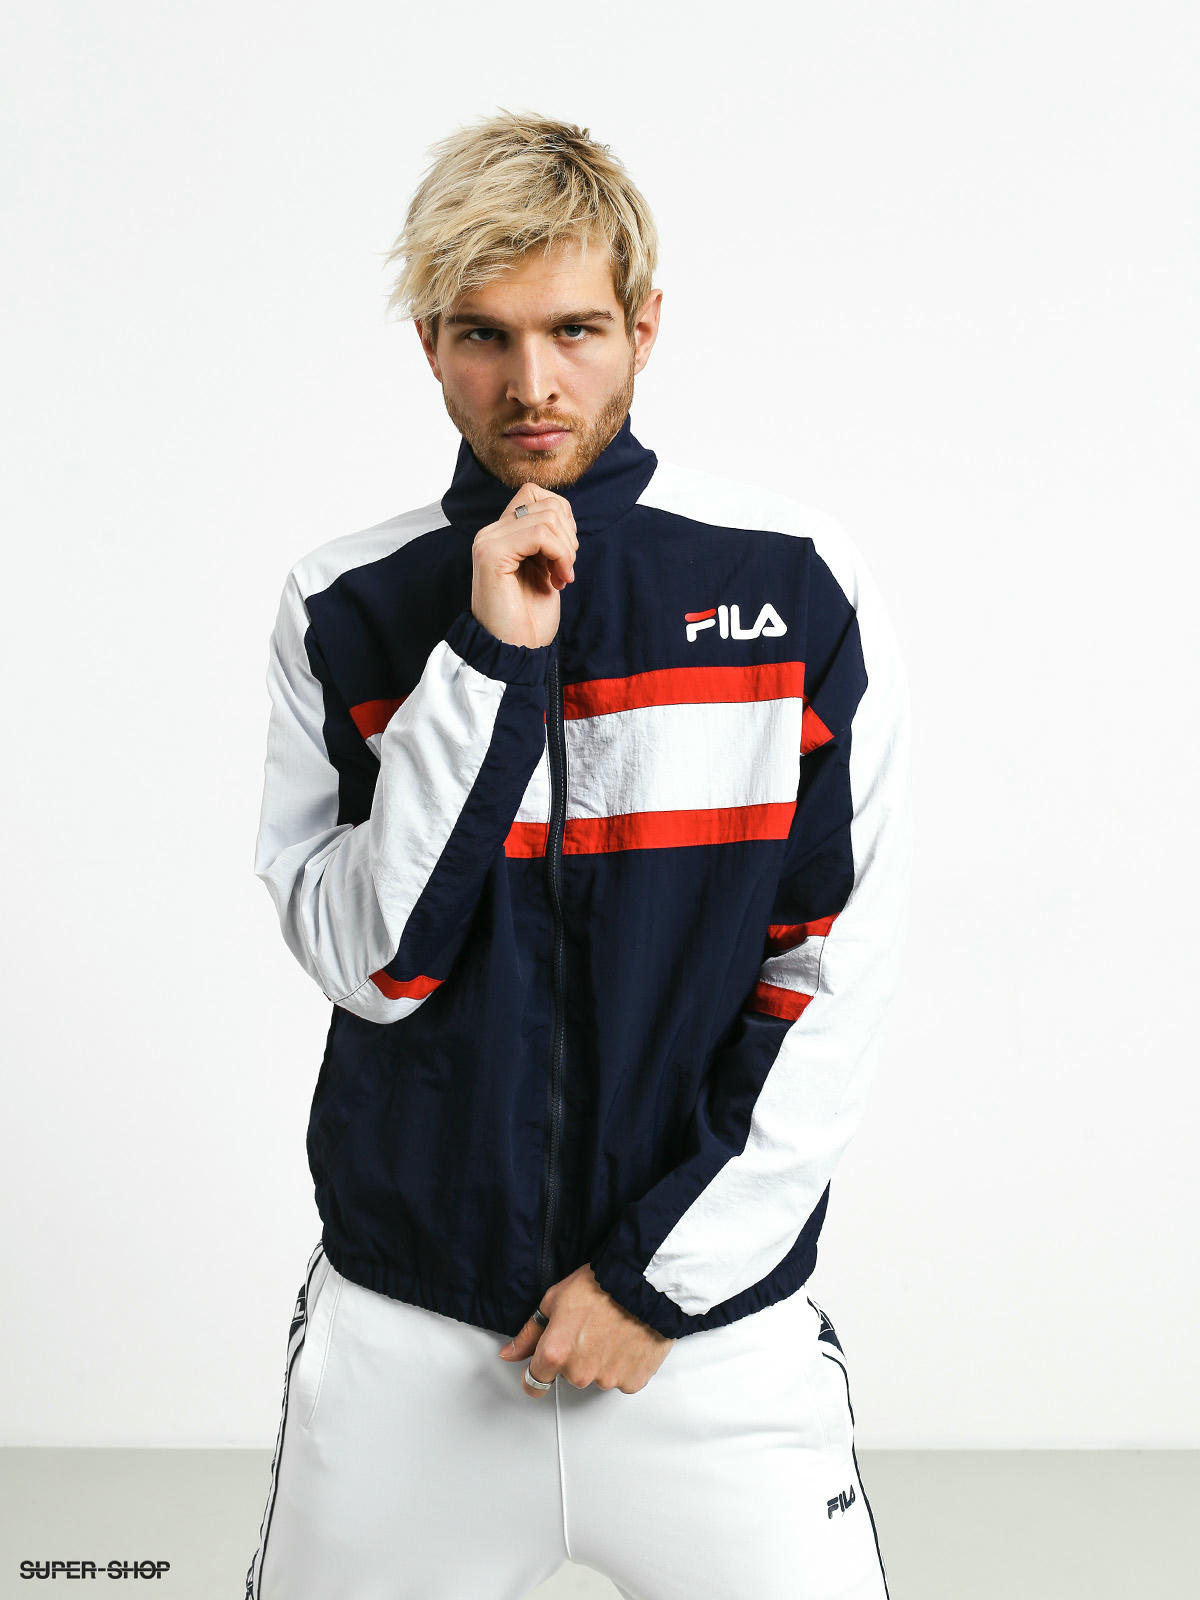 FILA Mens Gustas Patterned Gold Jacket - Gold - X-Large : Amazon.com.au:  Clothing, Shoes & Accessories